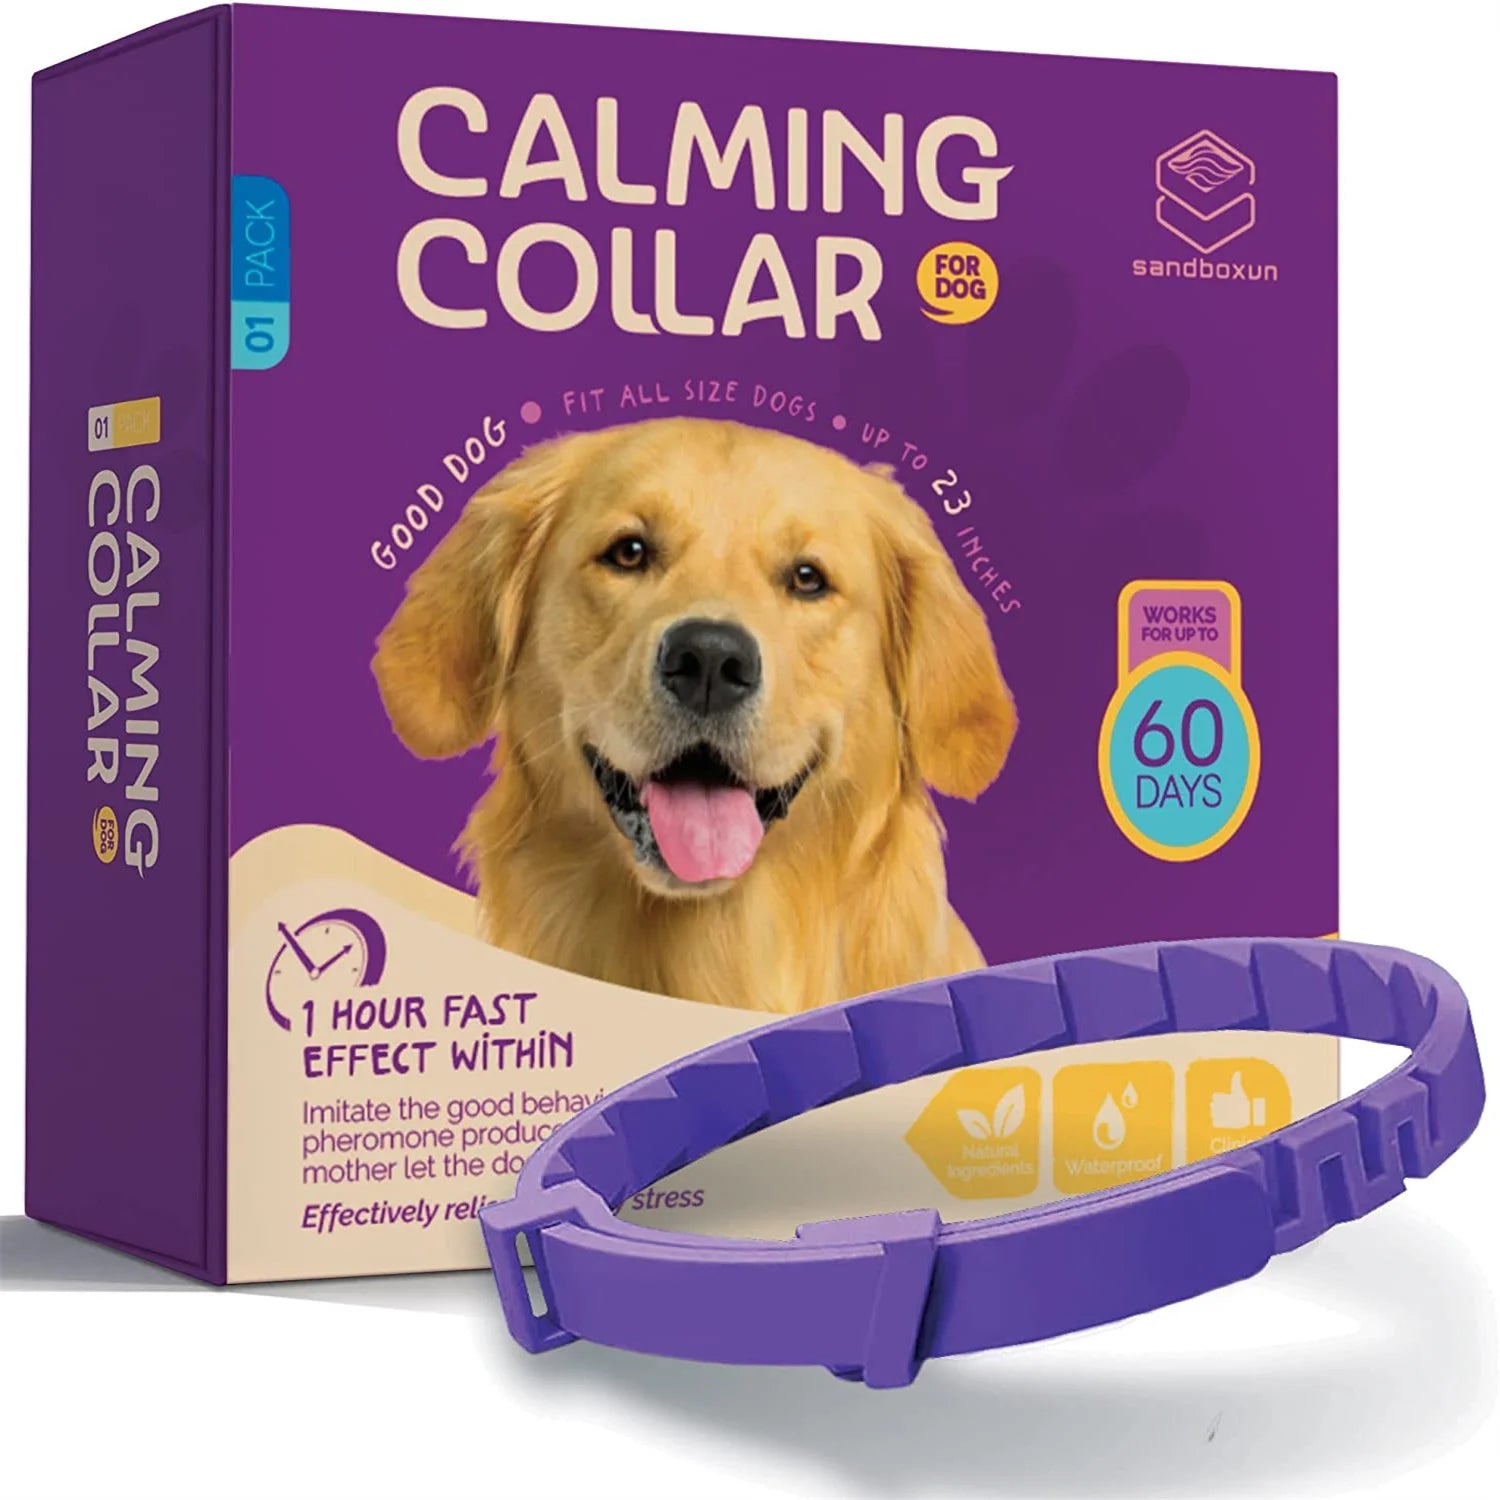 pet calming collar, fits all size dogs, adjustable collar, works up to 60 days